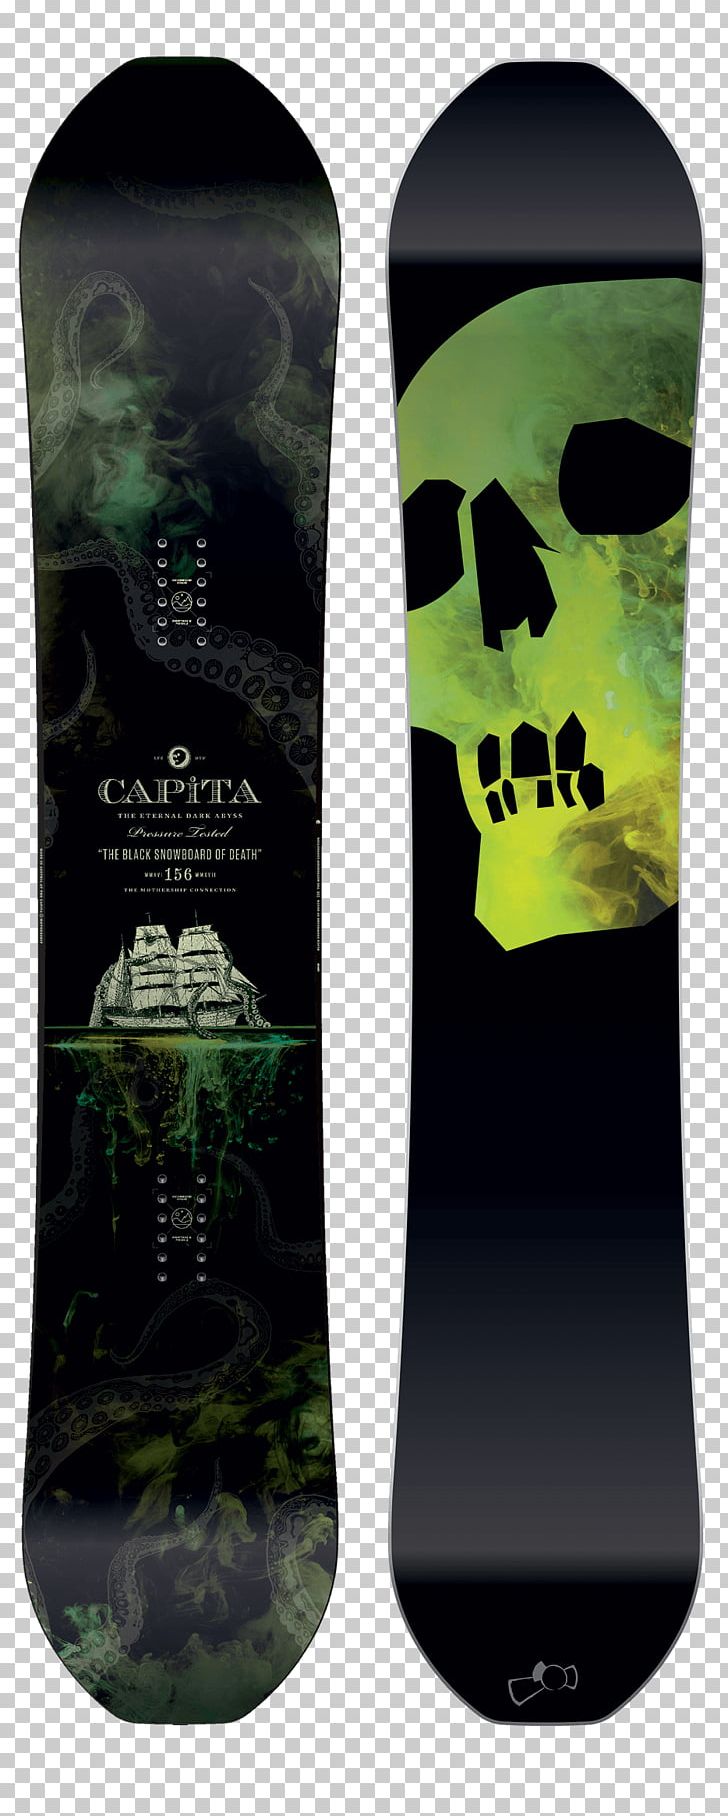 CAPiTA The Black Snowboard Of Death (2017) Snowboarding Skiing PNG, Clipart, Capita Horrorscope Fk 2017, Death Mountain, Ski, Ski Boots, Skiing Free PNG Download